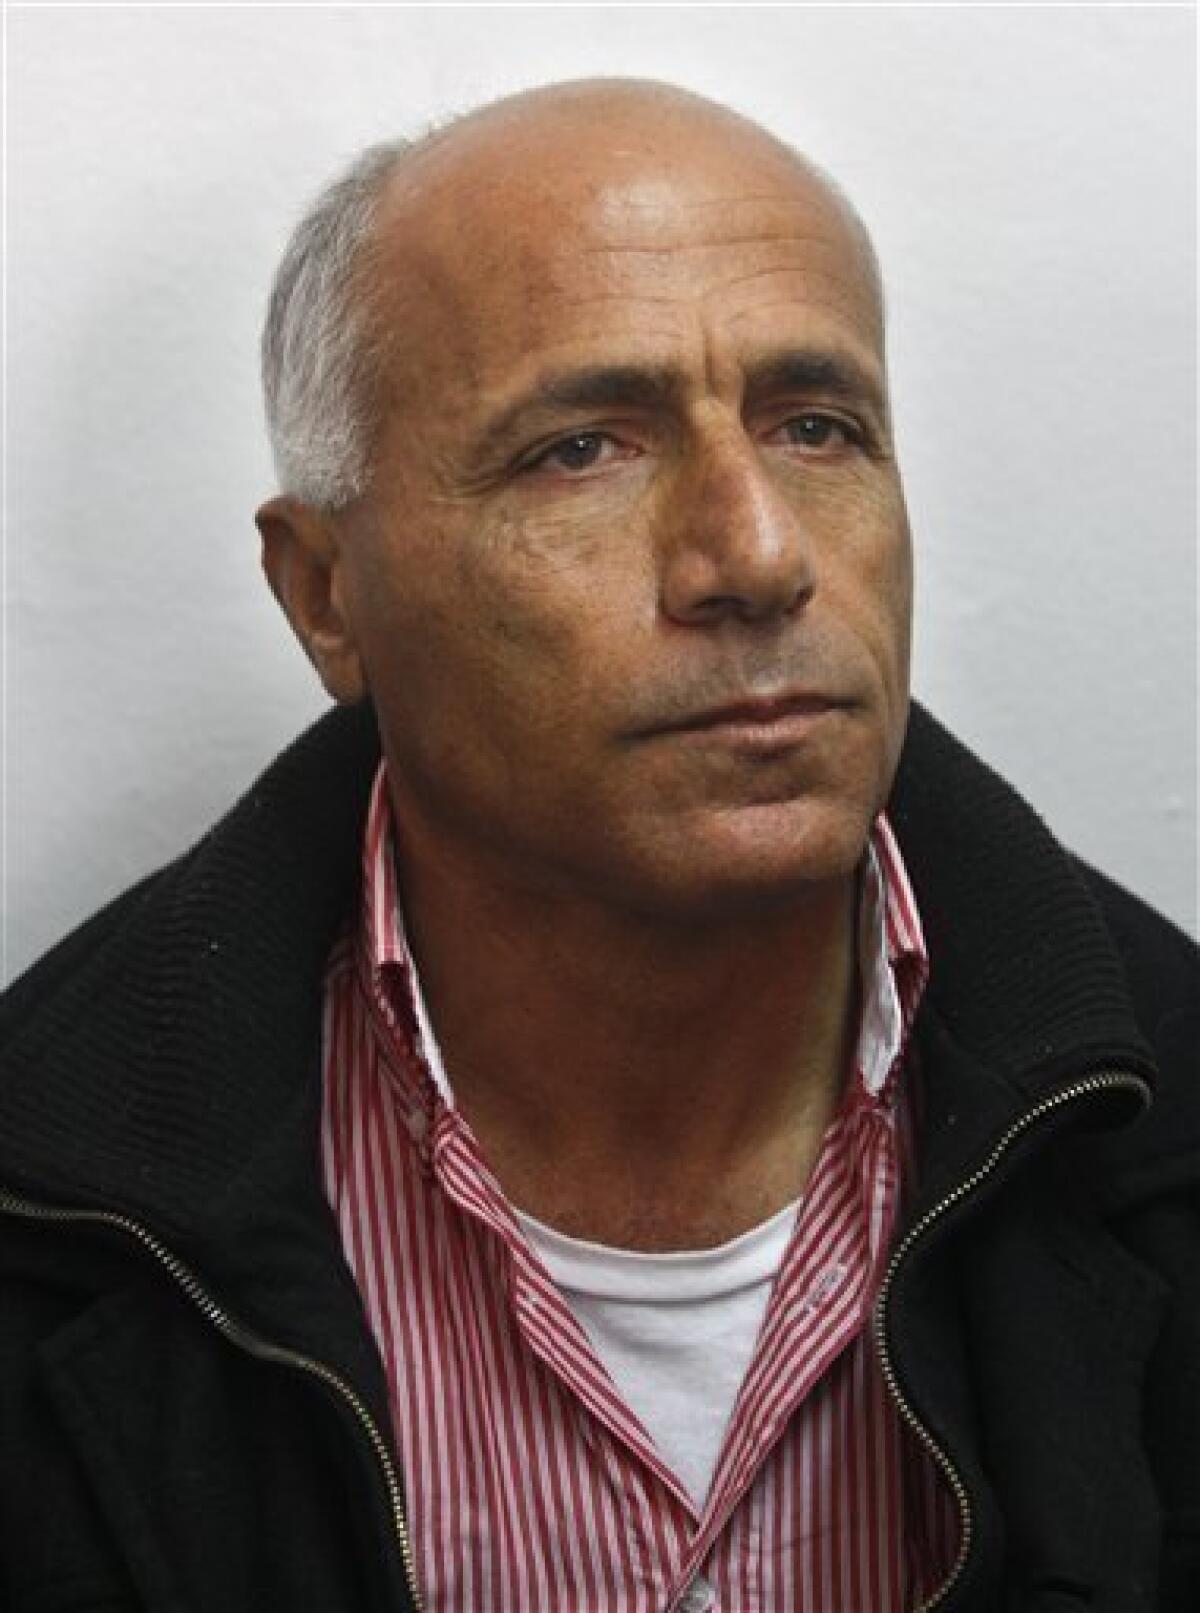 Israeli nuclear whistleblower Mordechai Vanunu waits in a courtroom before a hearing, in Jerusalem, Tuesday, Dec. 29, 2009. Vanunu was put under house arrest Tuesday after being charged with violating a condition of his 2004 release from an Israeli prison. Vanunu was a former low-level technician at an Israeli nuclear plant who leaked details and pictures of the operation to the Sunday Times of London in 1986. Vanunu served 18 years in prison and after his release was banned from leaving the country and having unauthorized contact with foreigners.(AP Photo/Dan Balilty)